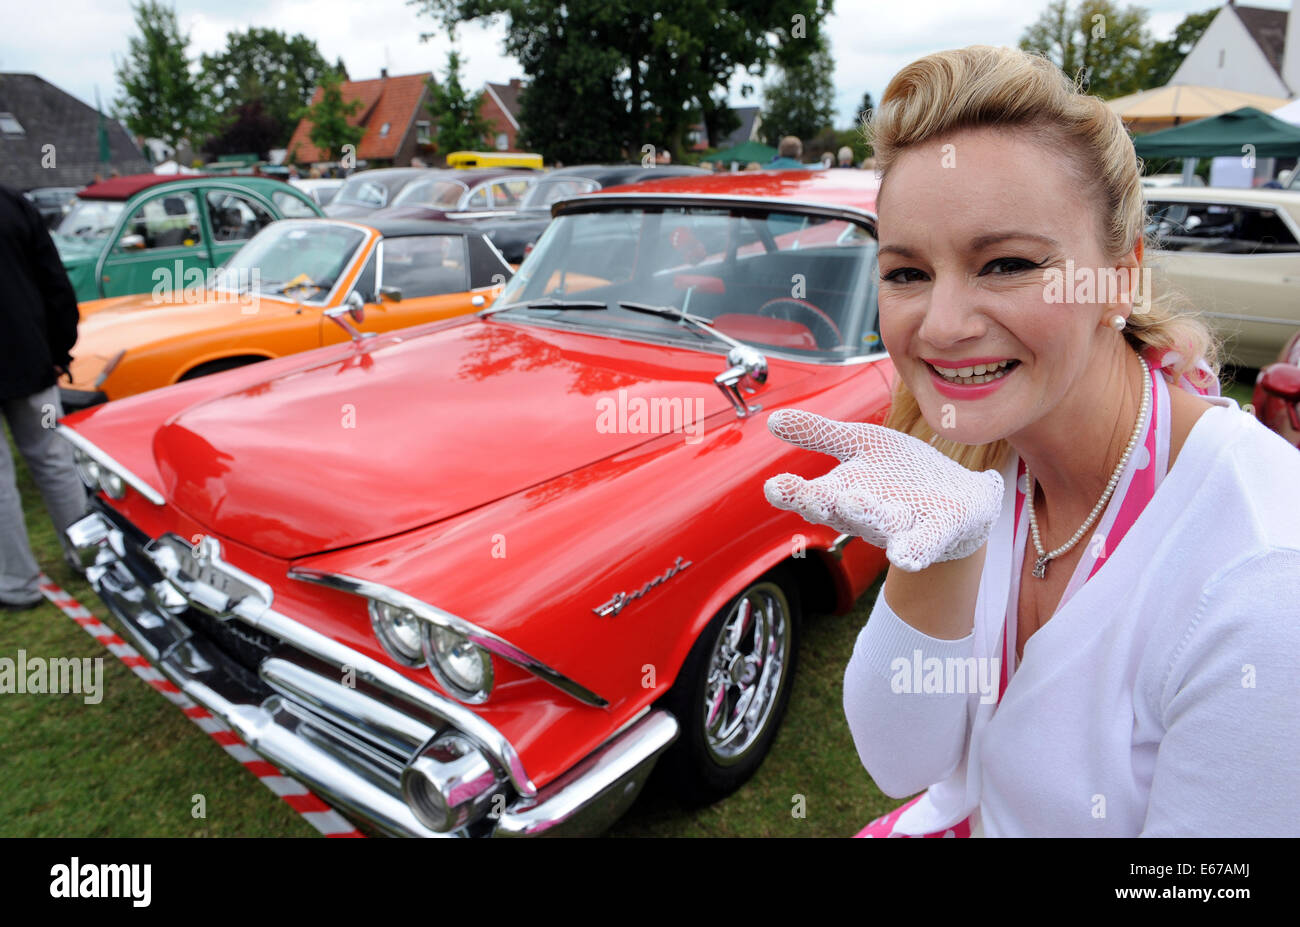 Rastede, Germany. 17th Aug, 2014. Sonja in a 50s dress presents the US car Dodge Coronet from 1959 at the 8th vintage car meeting for cars and motorcycles in Rastede, Germany, 17 August 2014. Photo: Ingo Wagner/dpa/Alamy Live News Stock Photo